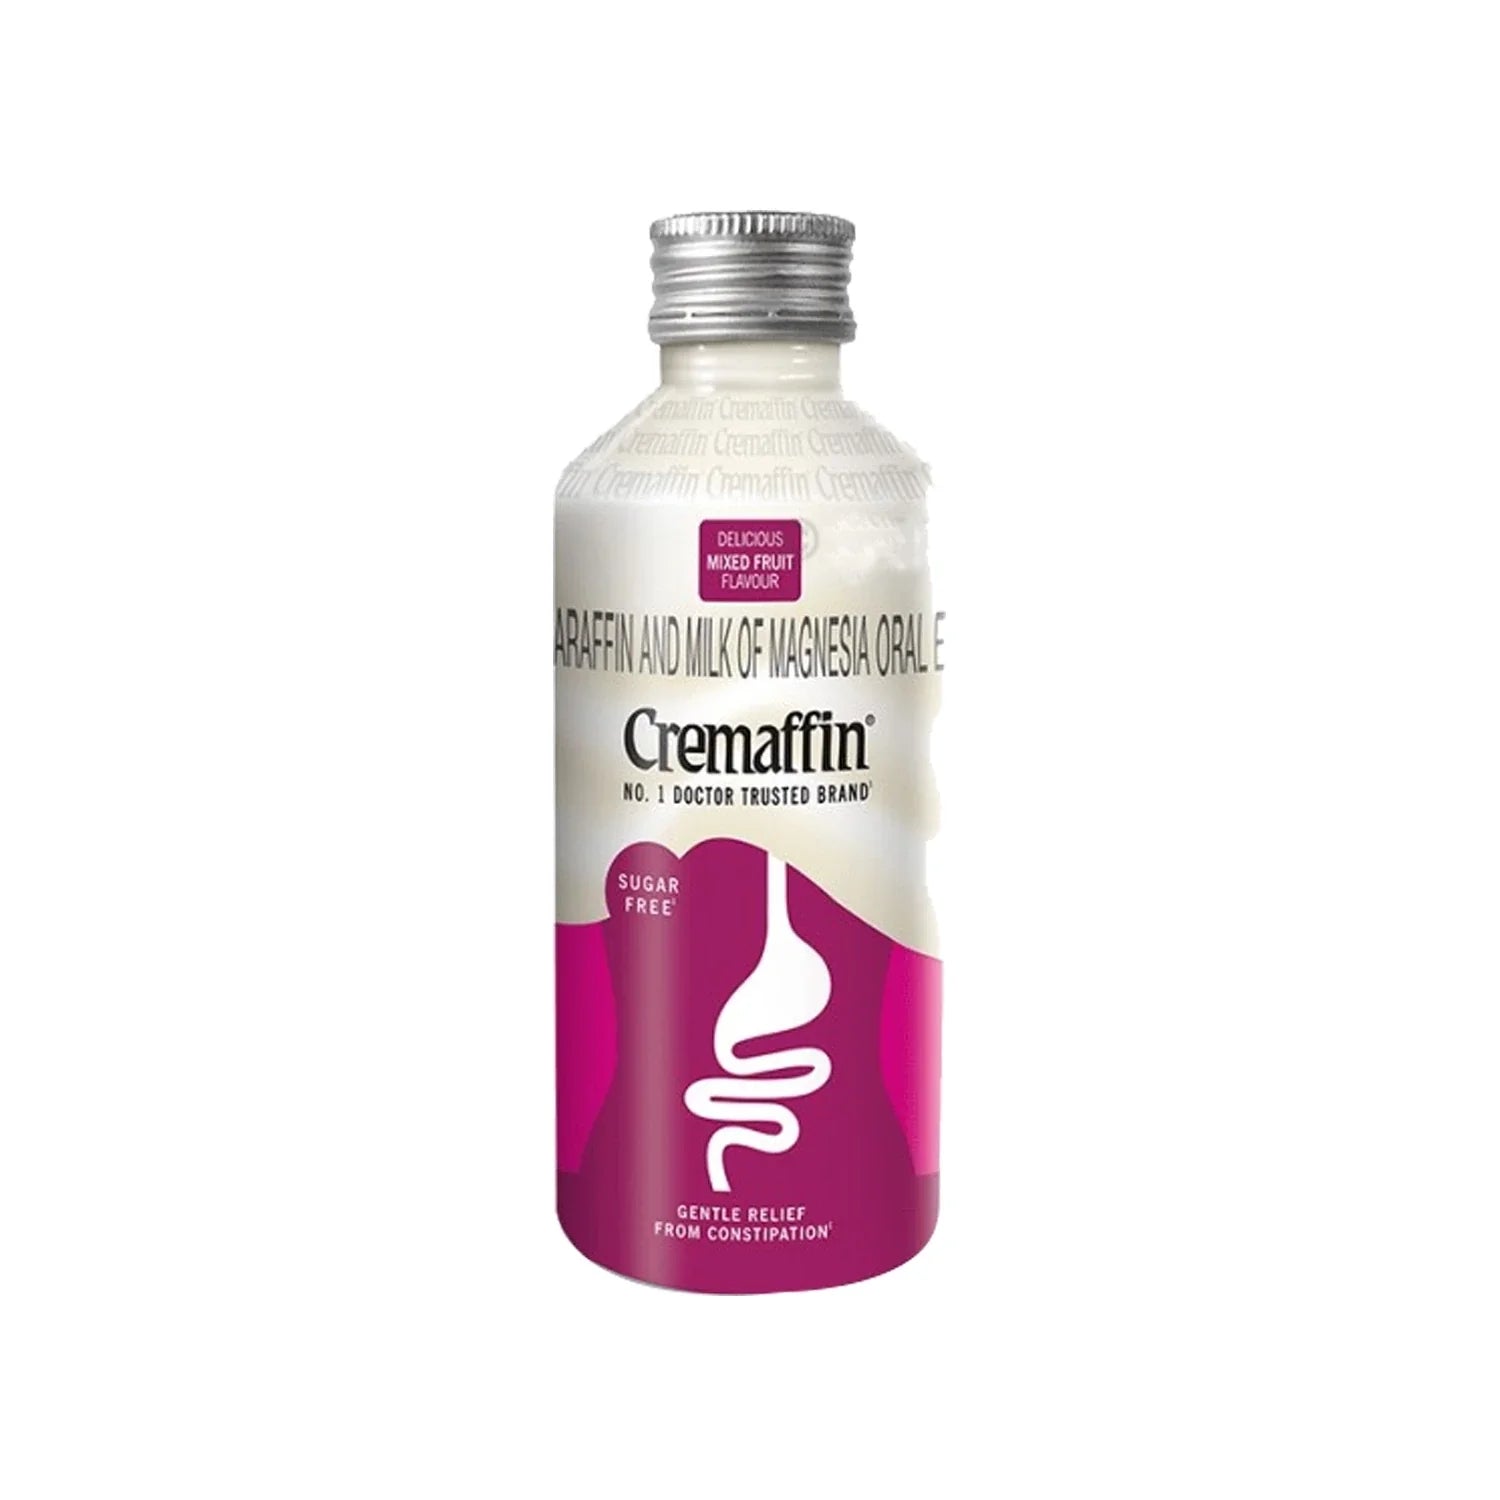 Cremaffin Syrup 225ml - Mixed Fruit Flavour